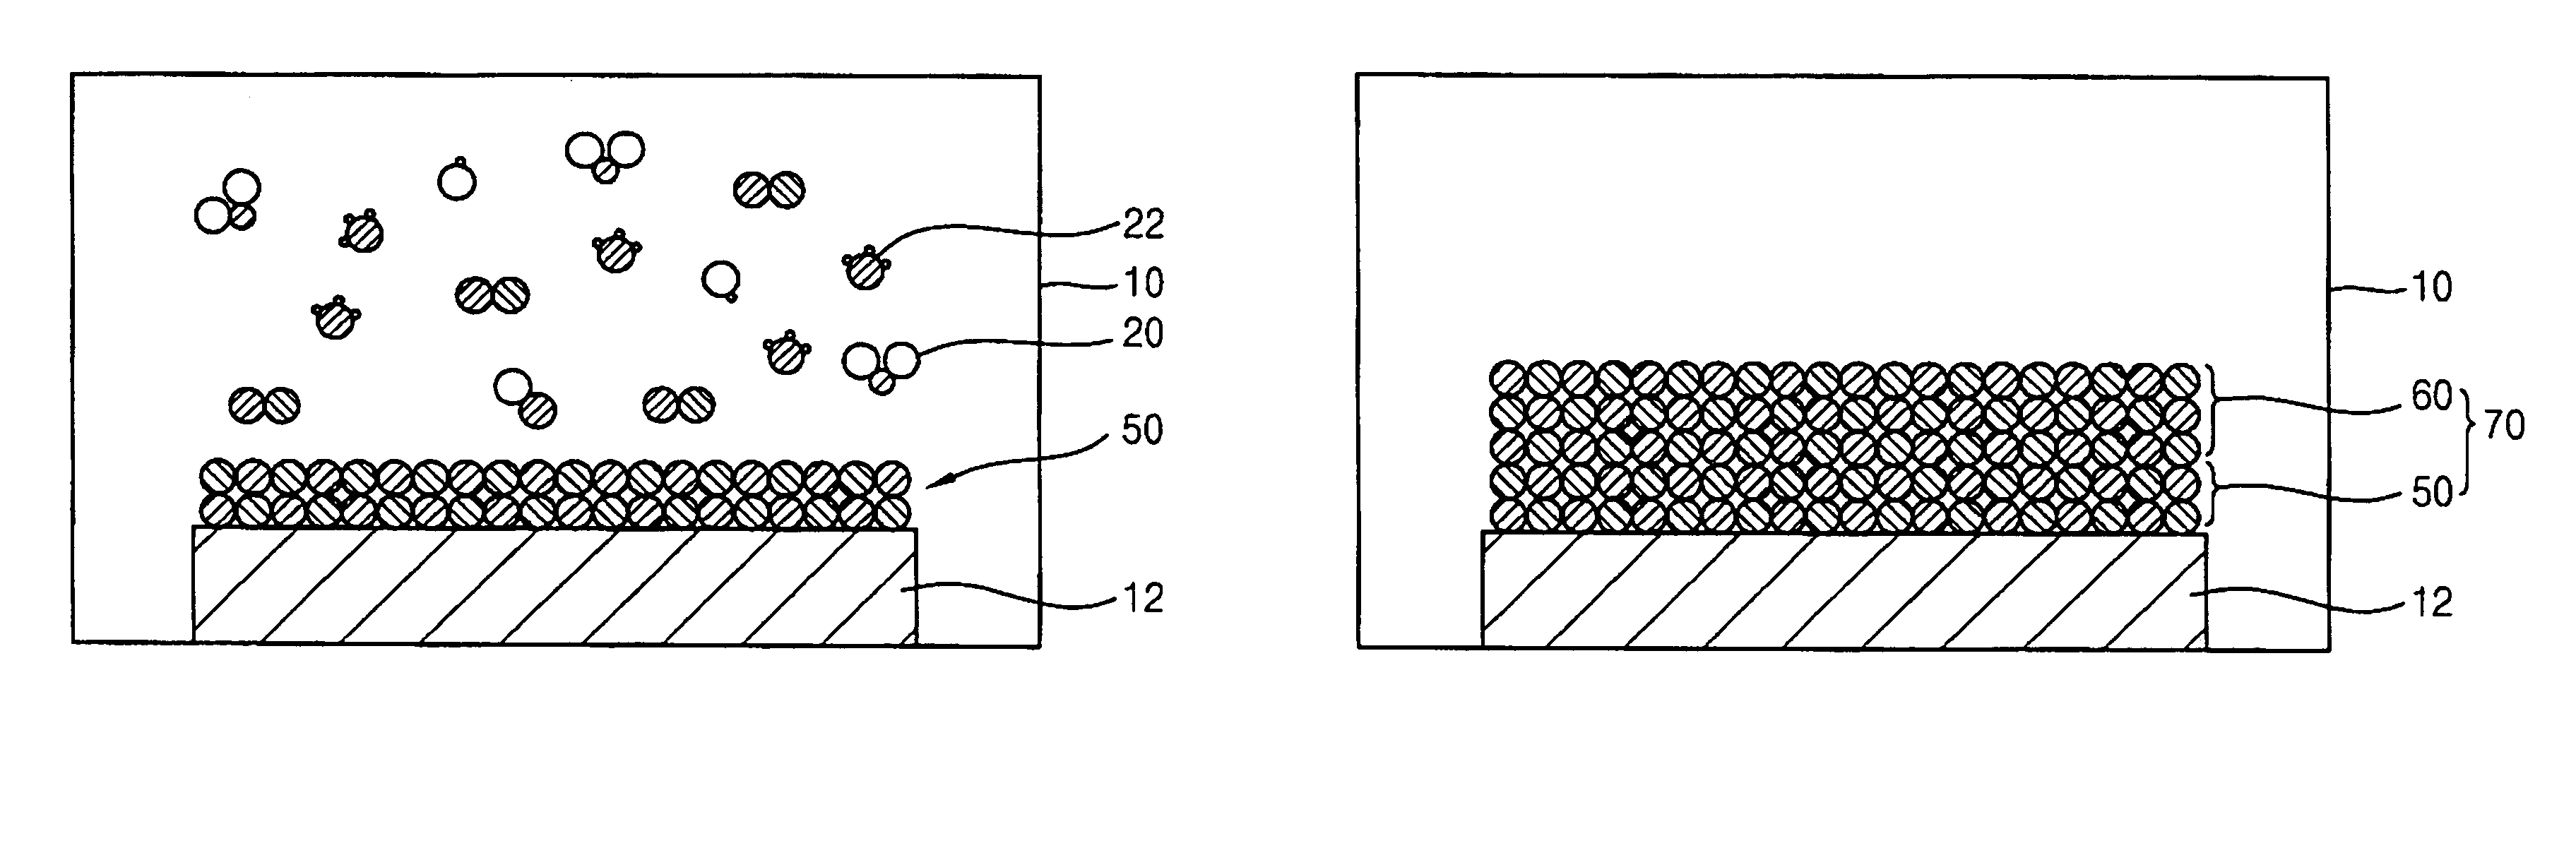 Method of forming a layer on a semiconductor substrate